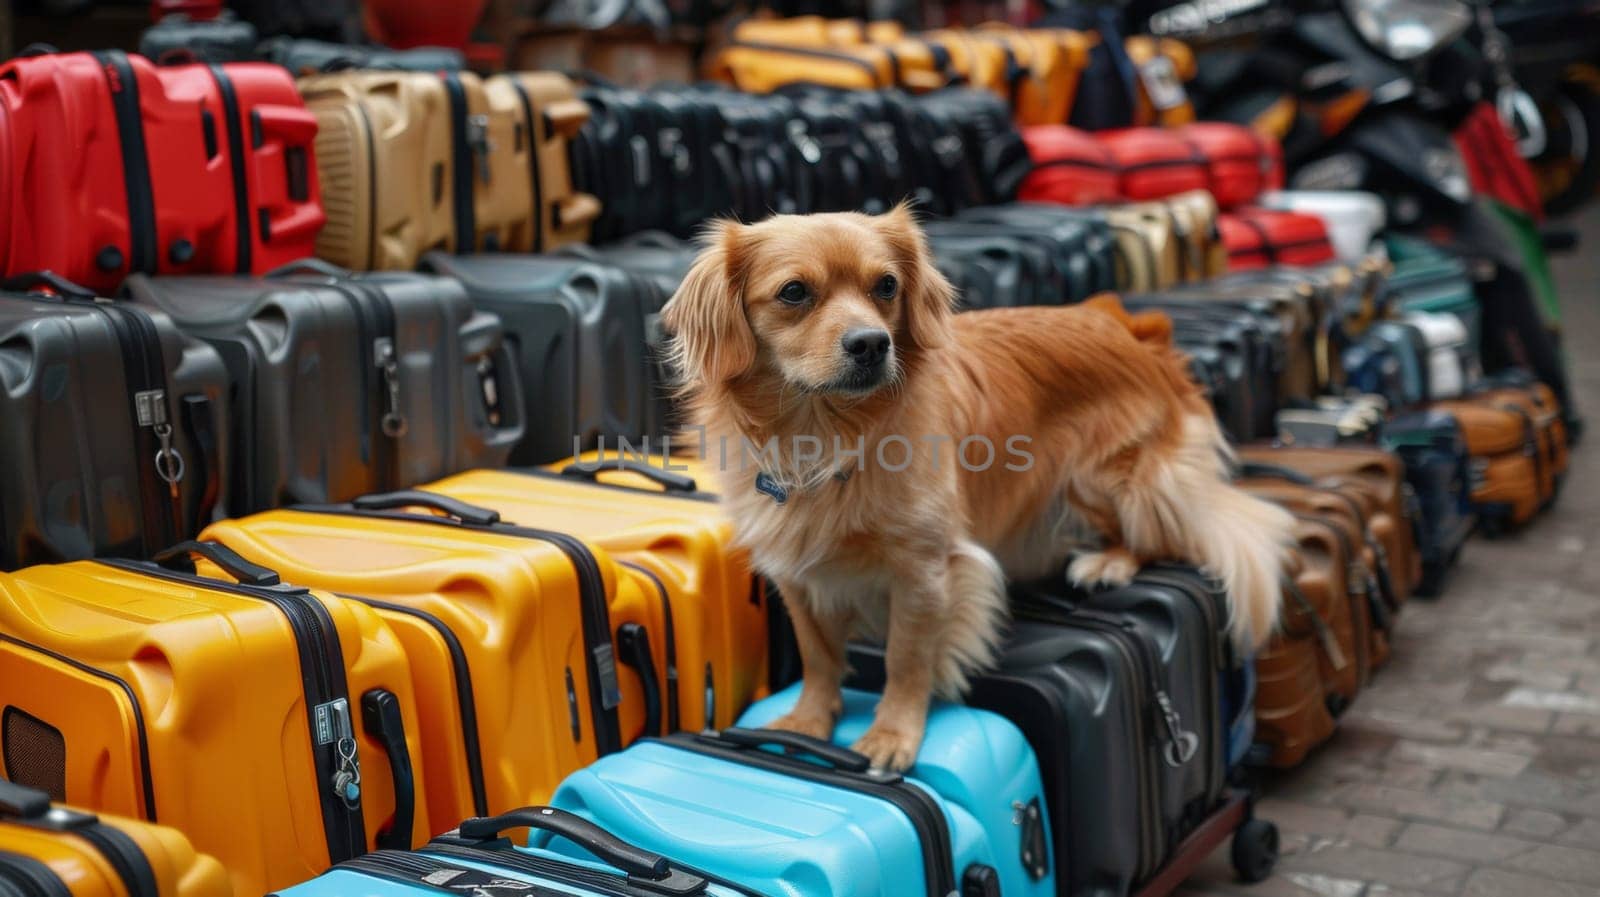 A dog standing on top of a pile of luggage, AI by starush